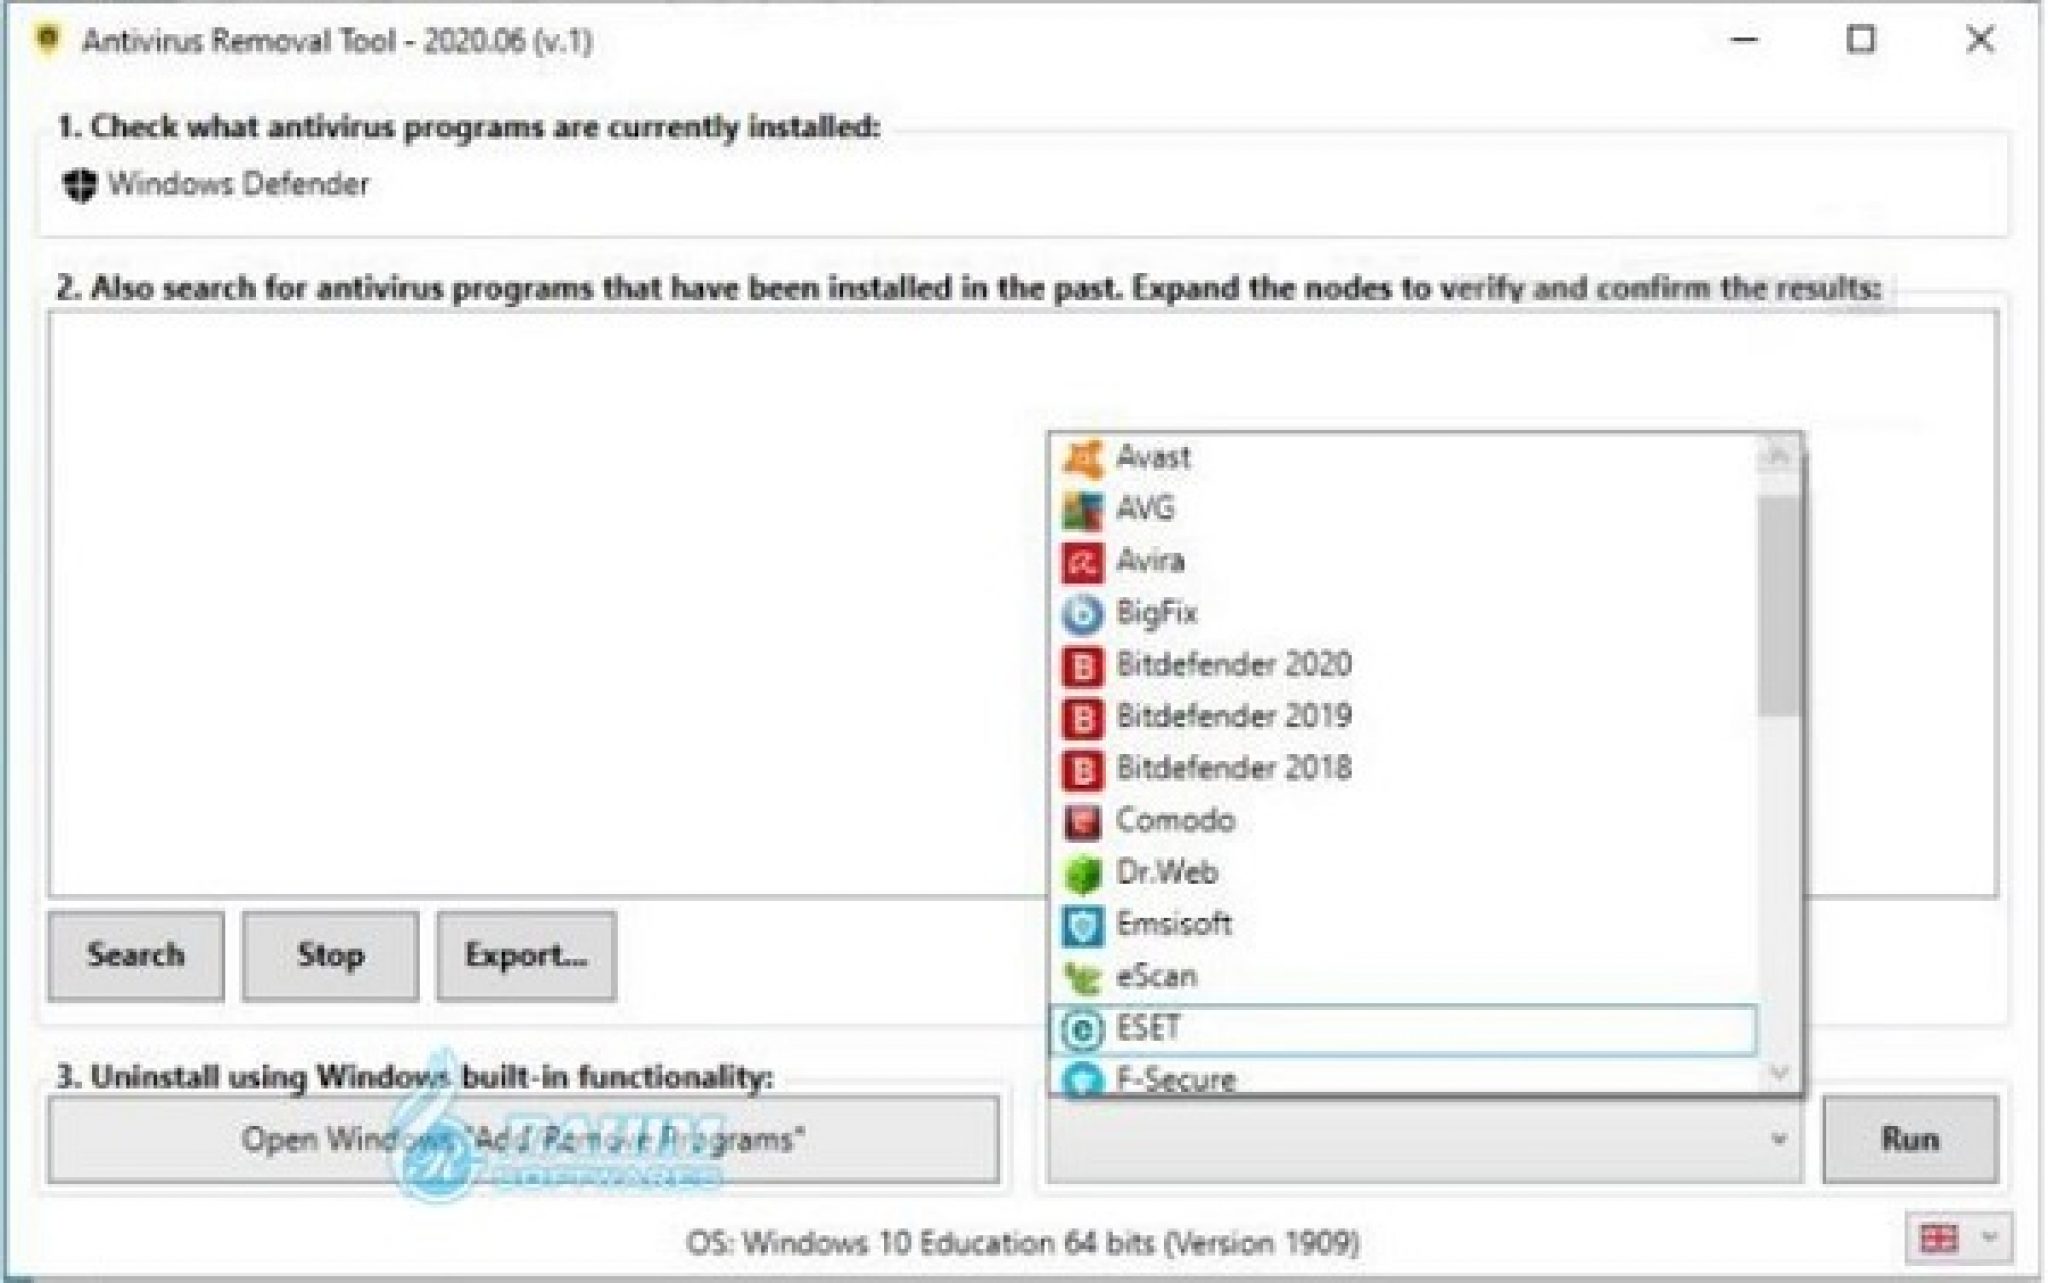 download the last version for windows Antivirus Removal Tool 2023.10 (v.1)